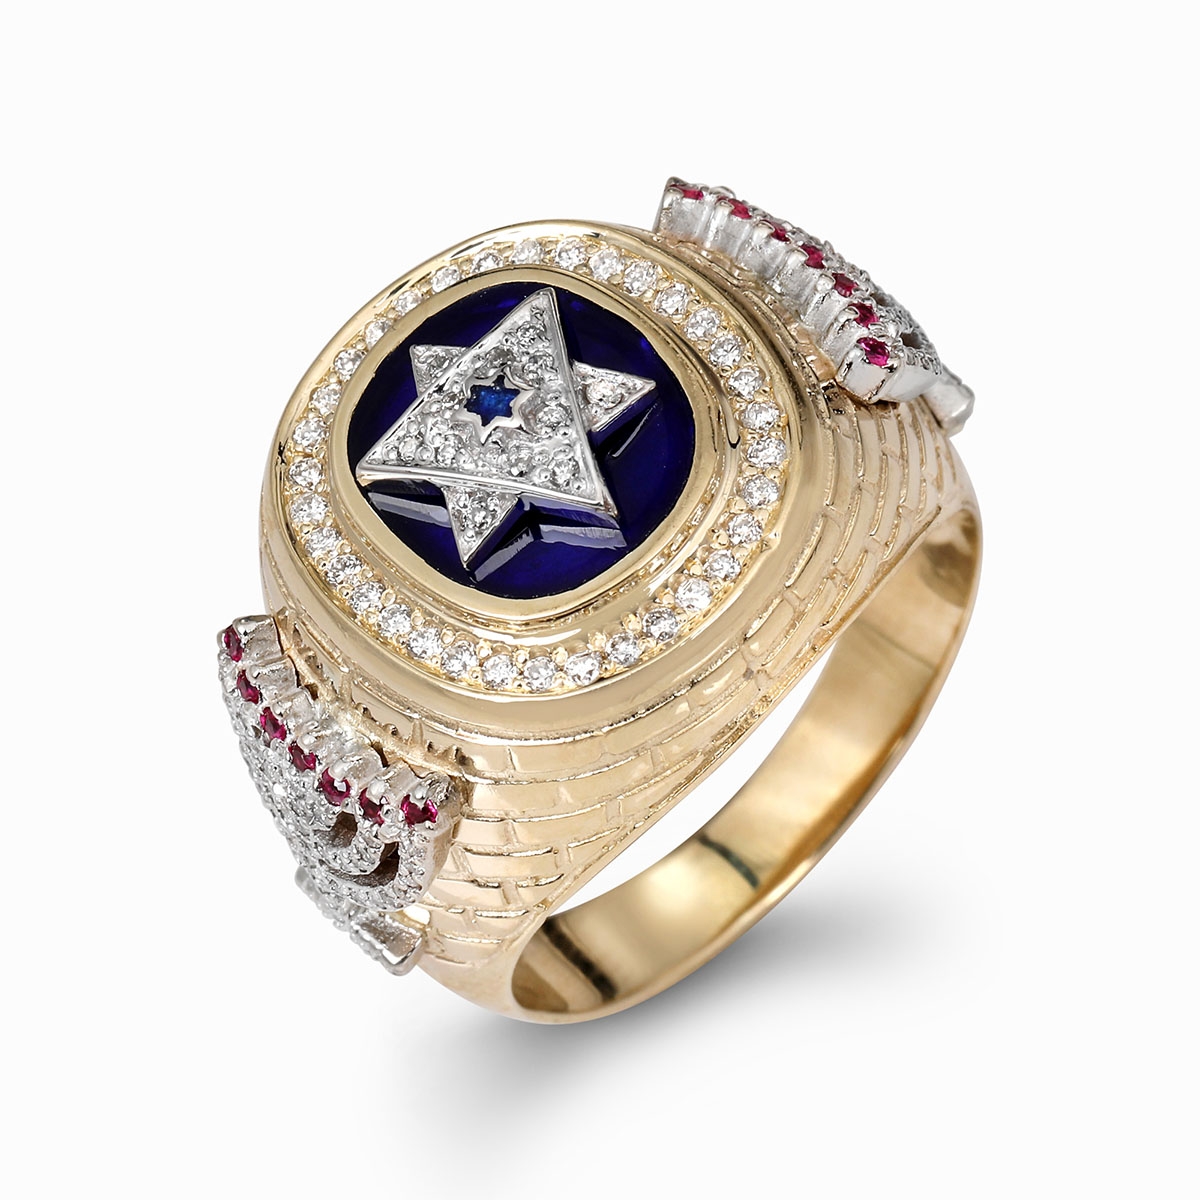 Anbinder Jewelry Luxurious Two-Toned 14K Gold Ring With Star of David and Menorah Designs - 1